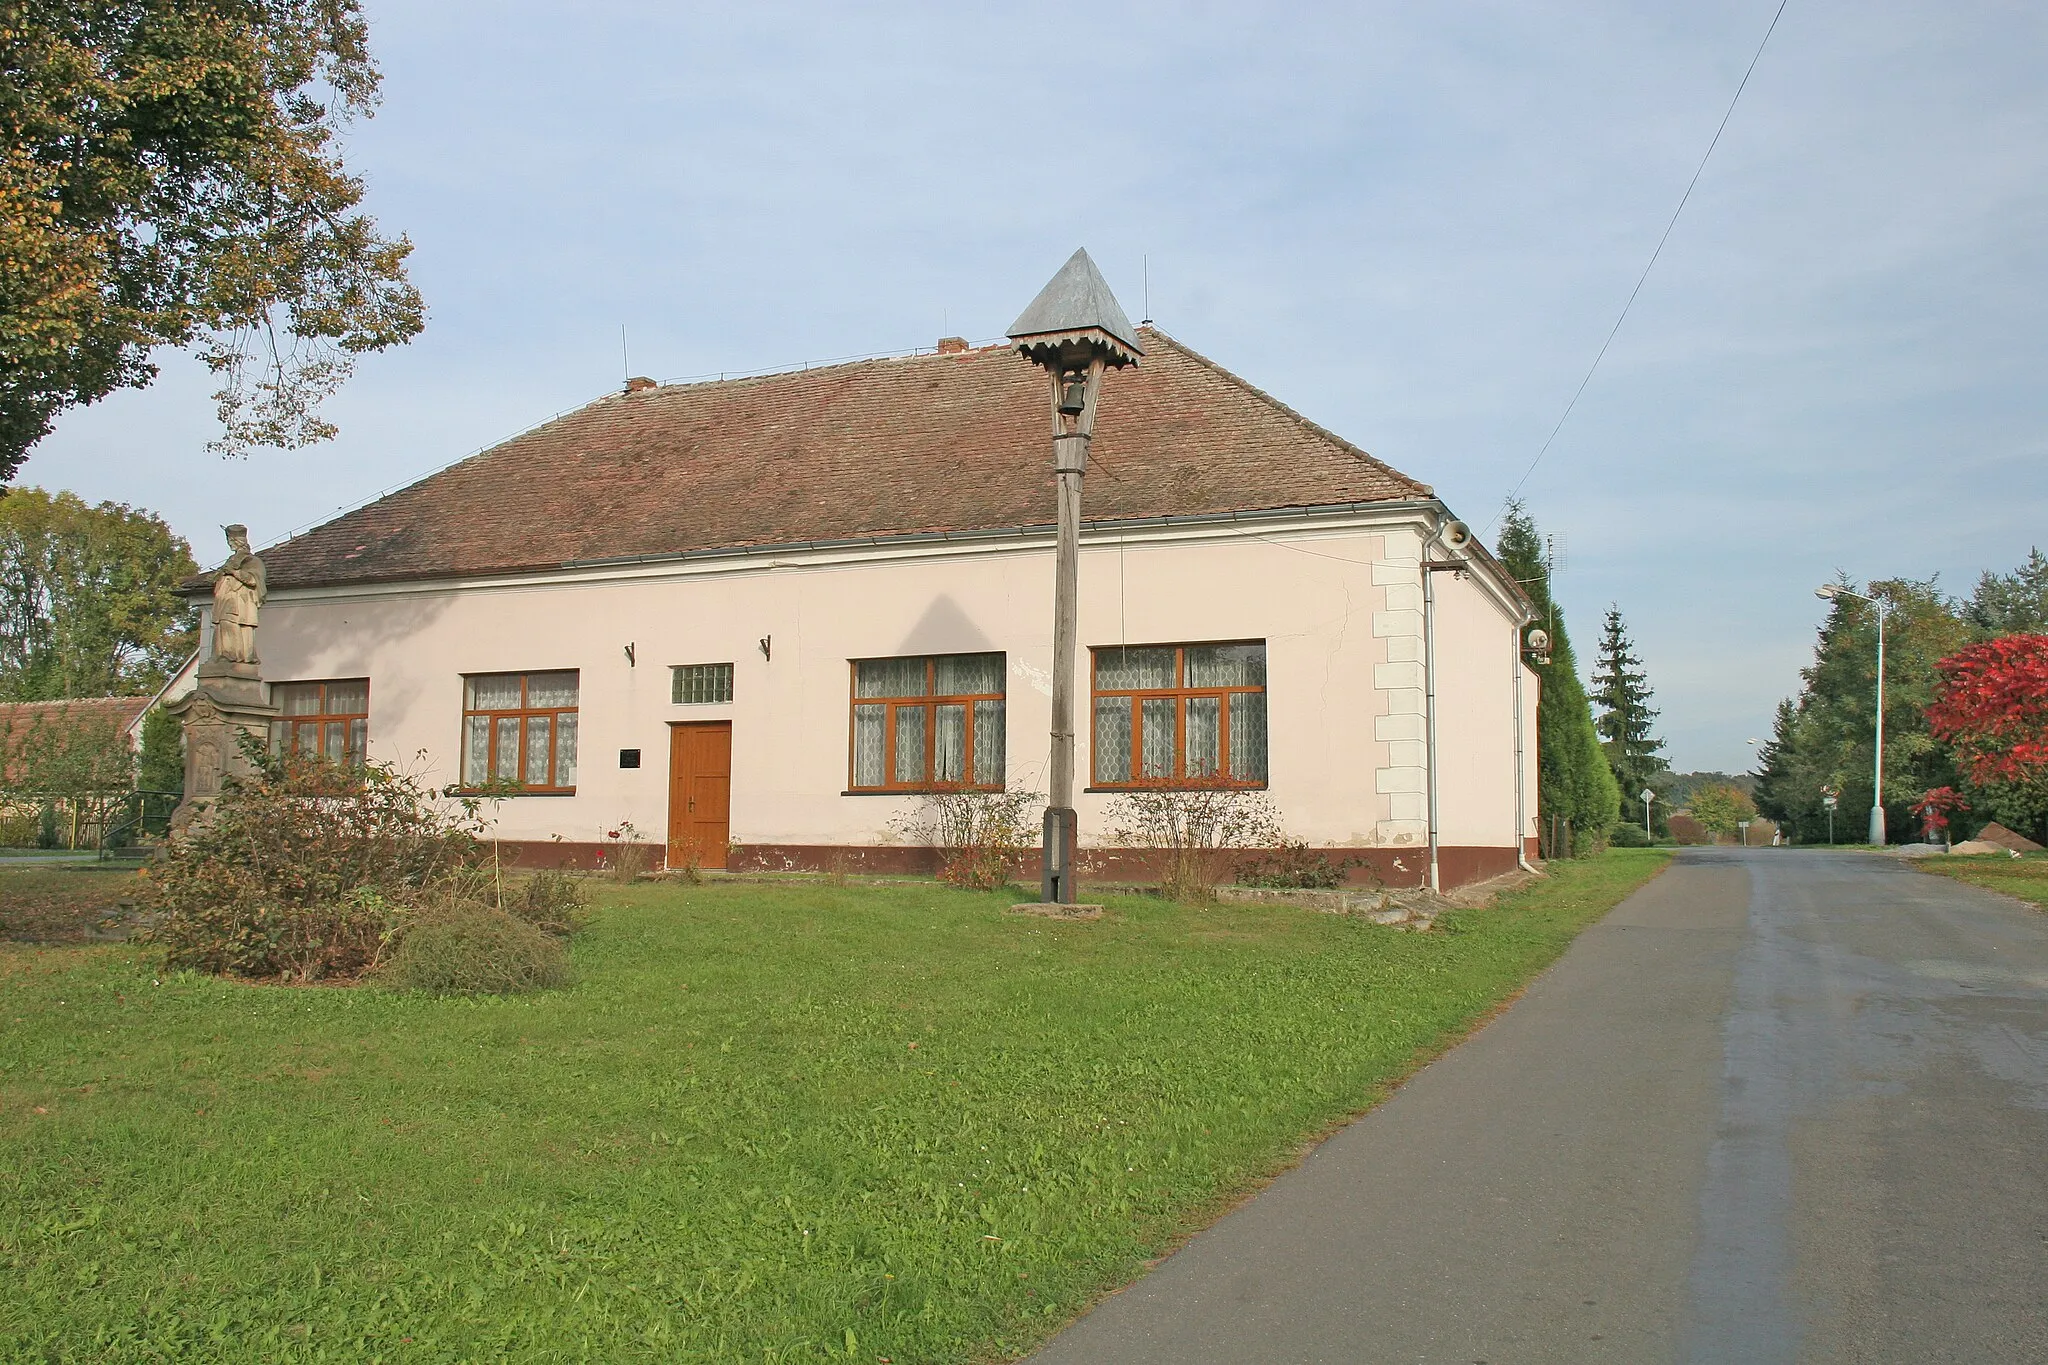 Photo showing: Kamilov čp. 40
Camera location 50° 14′ 03.88″ N, 15° 21′ 25.5″ E View this and other nearby images on: OpenStreetMap 50.234411;   15.357084

This file was created as a part of the photographic program of Wikimedia Czech Republic. Project: Foto českých obcí The program supports Wikimedia Commons photographers in the Czech Republic.